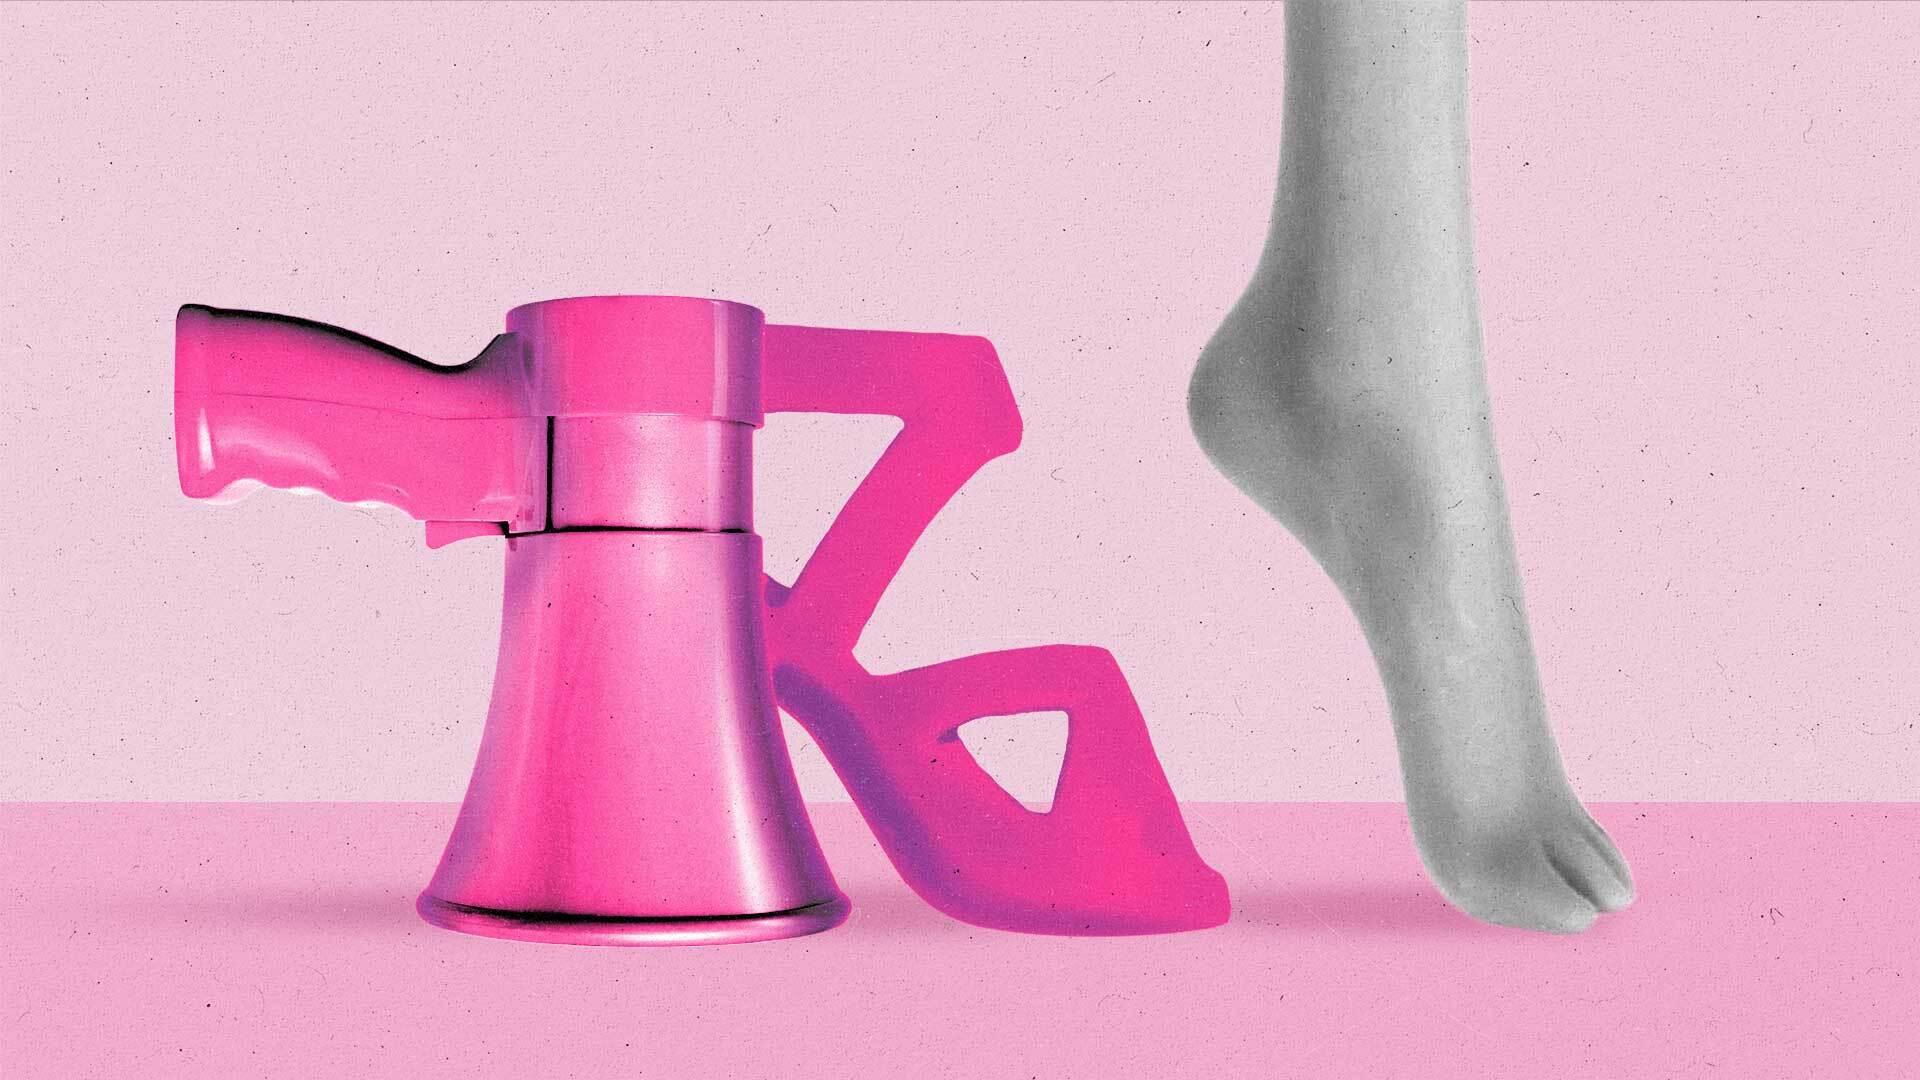 Barbie's foot stands on its toes in front of a pink stiletto heel that's made from a megaphone.